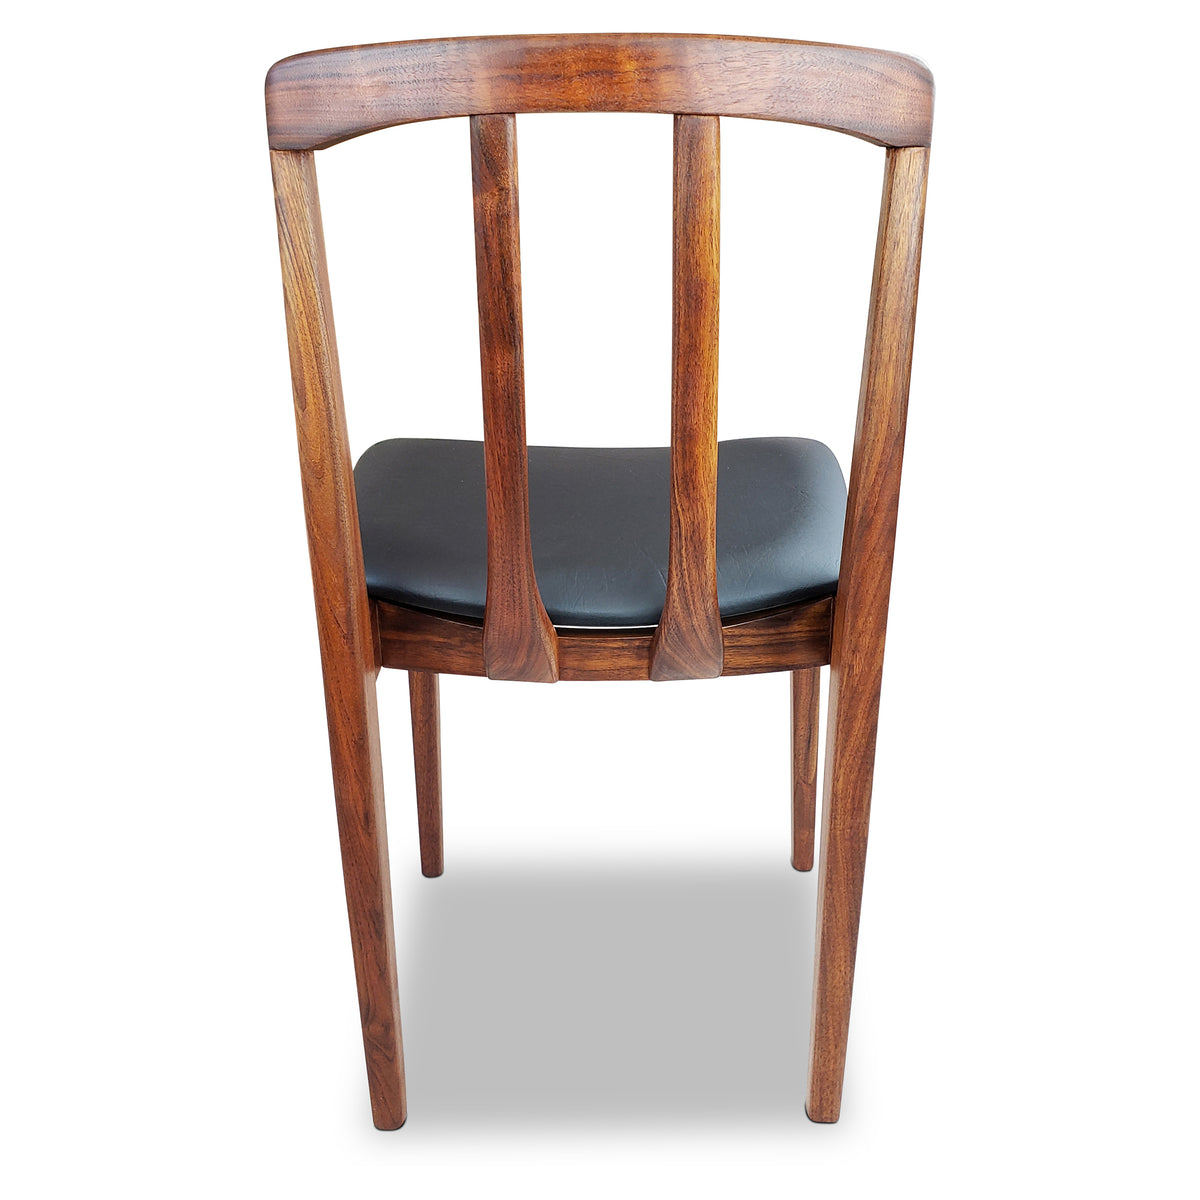 Vintage Walnut Dining Chairs by Honderich Furniture Co.